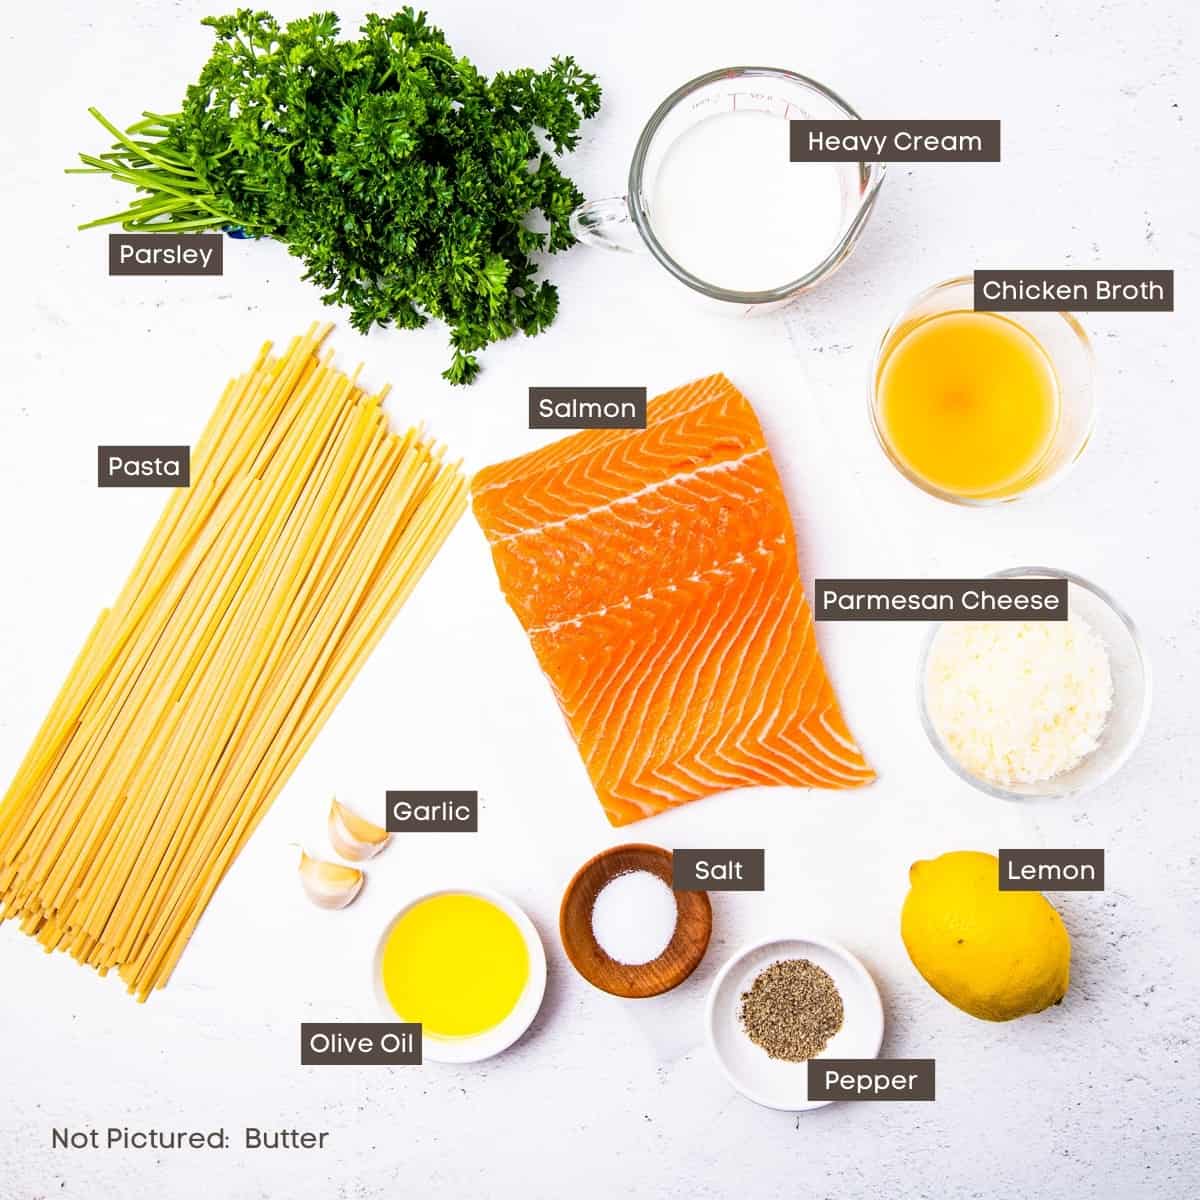 The ingredients for the salmon pasta recipe are shown arranged on a countertop.